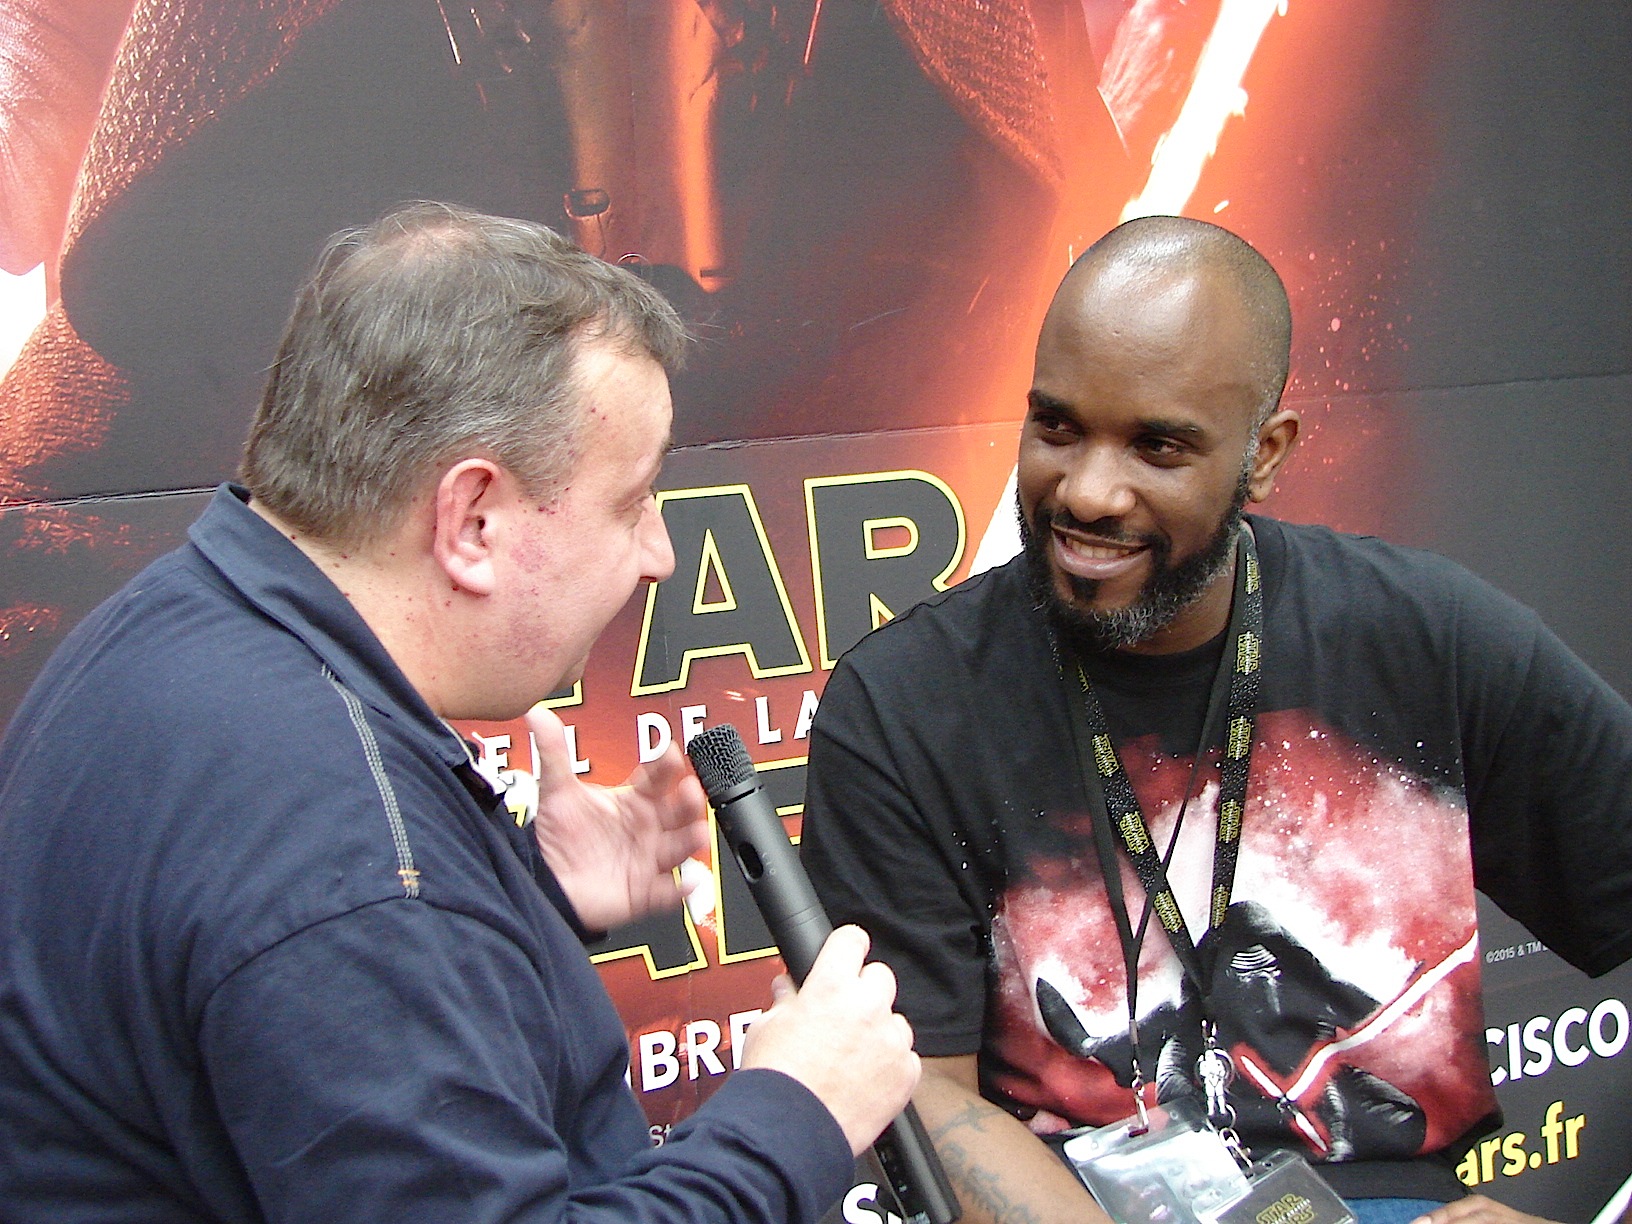 Stormtrooper Actor Phoenix James at ASFA Star Wars Convention in Amélie les Bains in South of France - Photo by Virginie Maurille 3